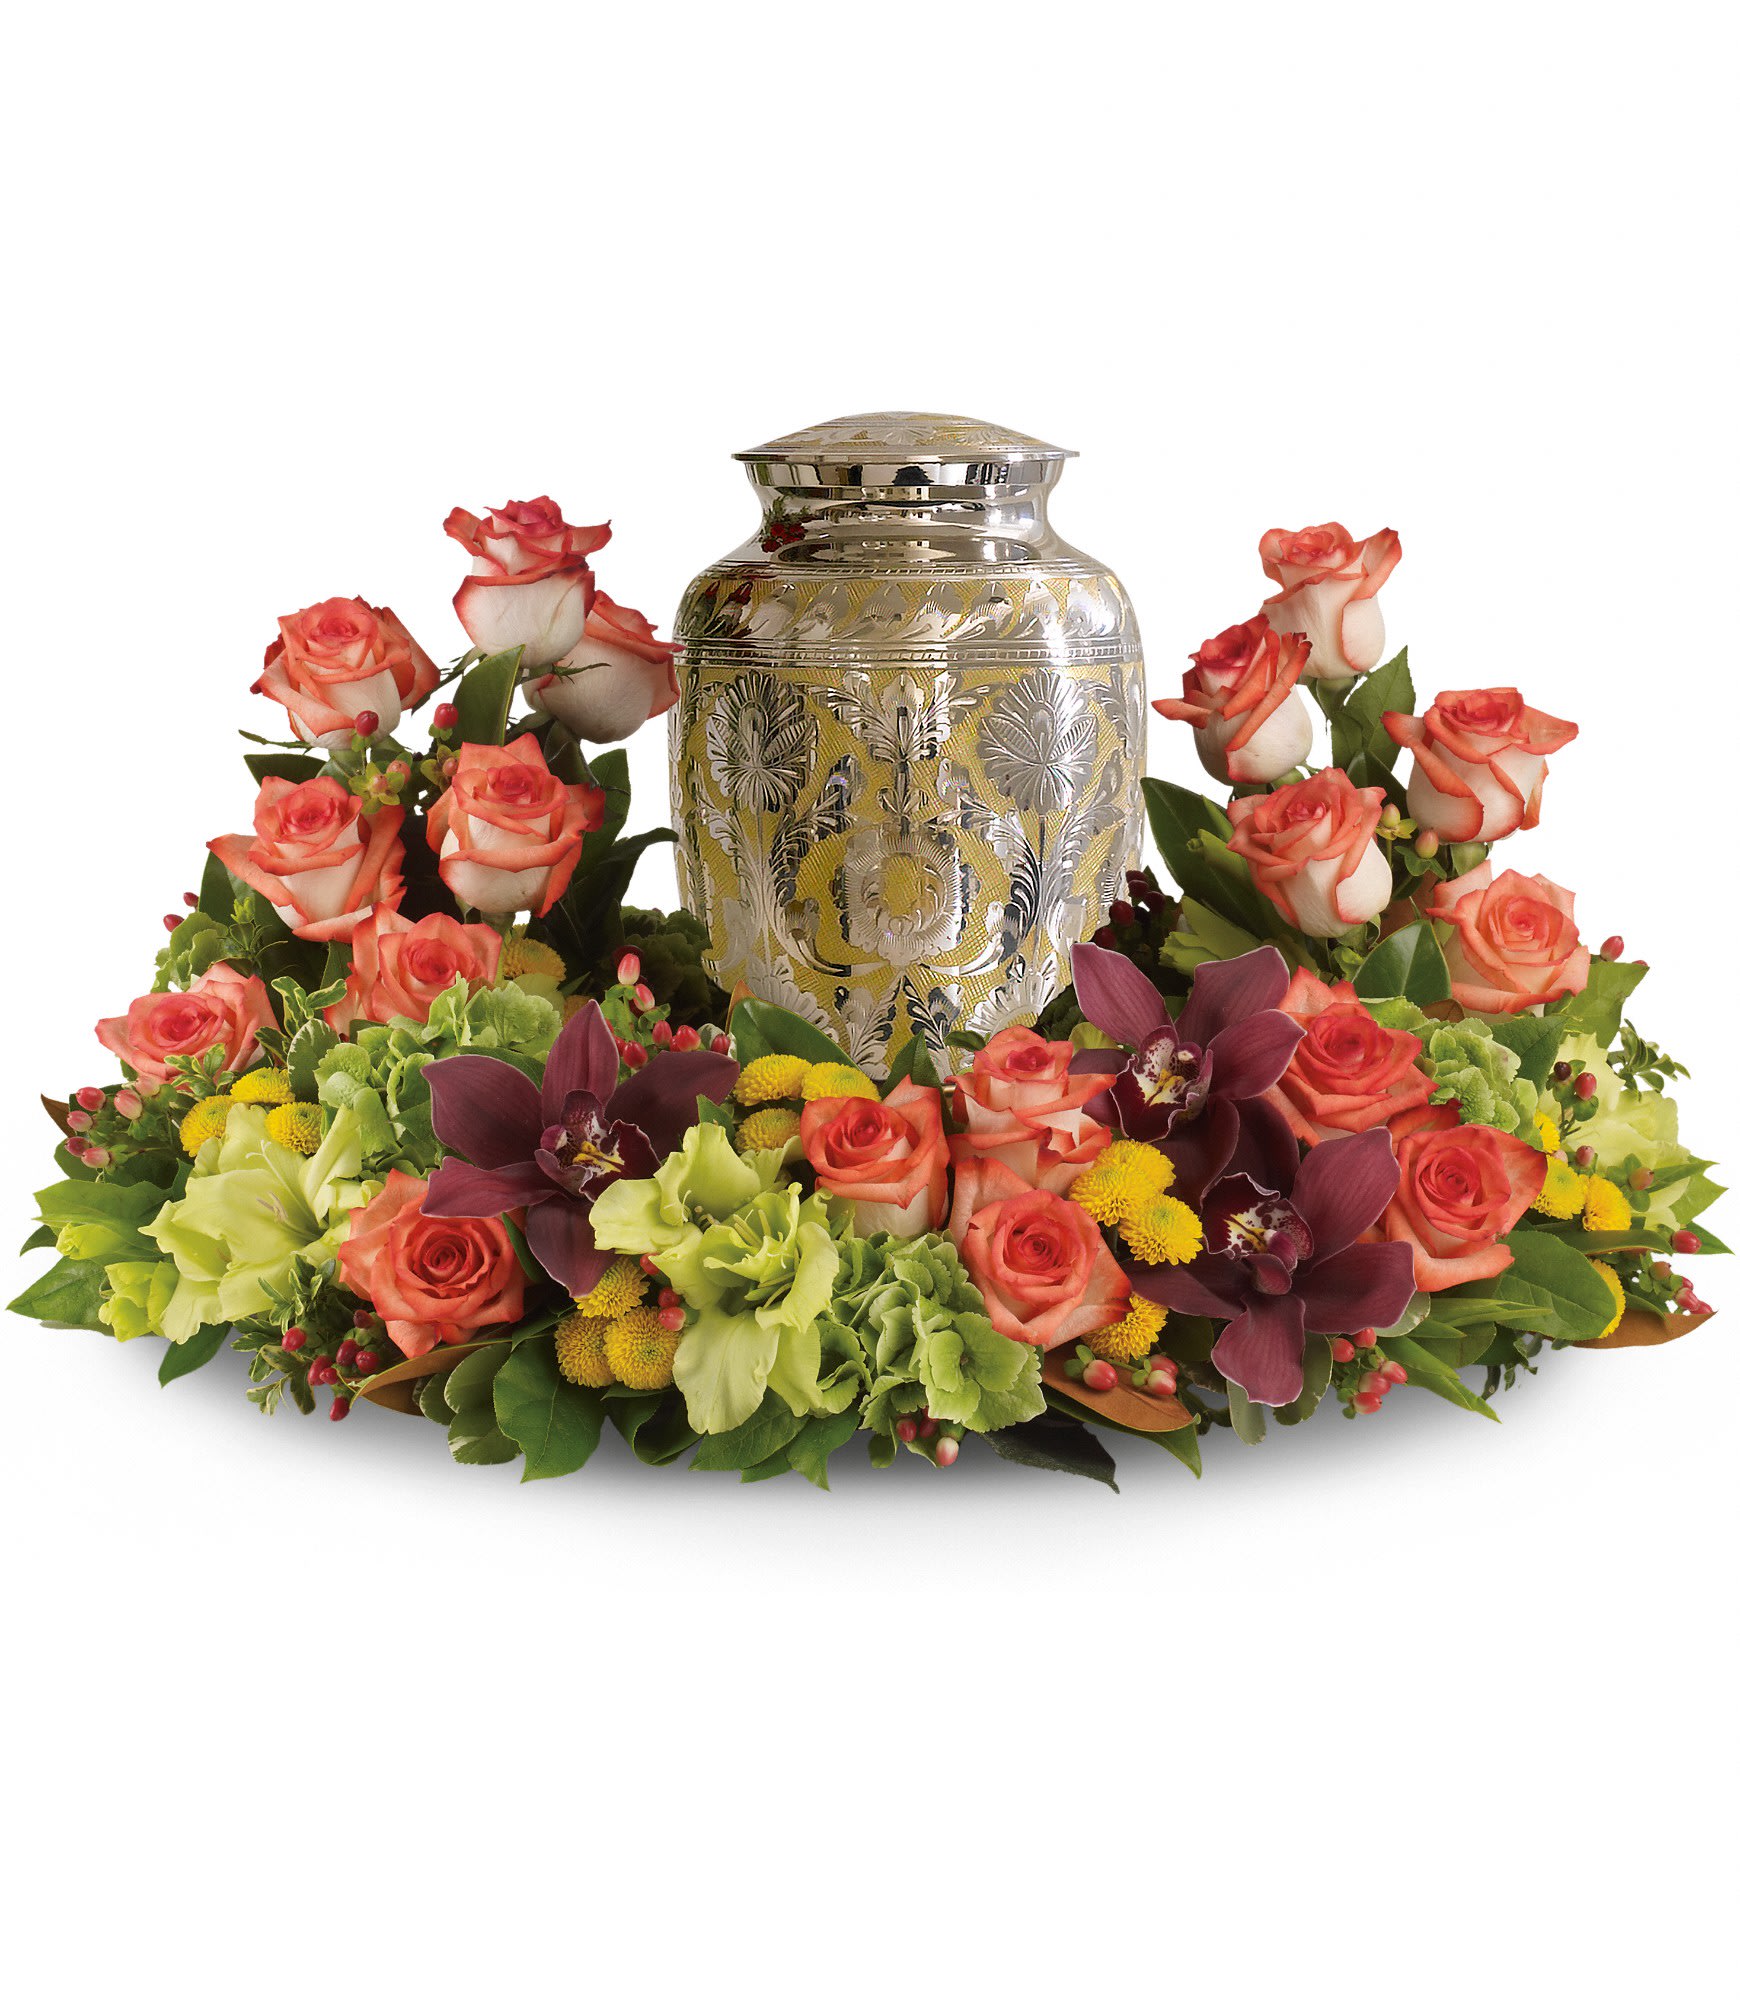 Sunset Wreath by Teleflora - A rich and subtly hued garden expresses sympathy most thoughtfully, in a gentle oval arrangement that honors and embraces a cherished memory.  